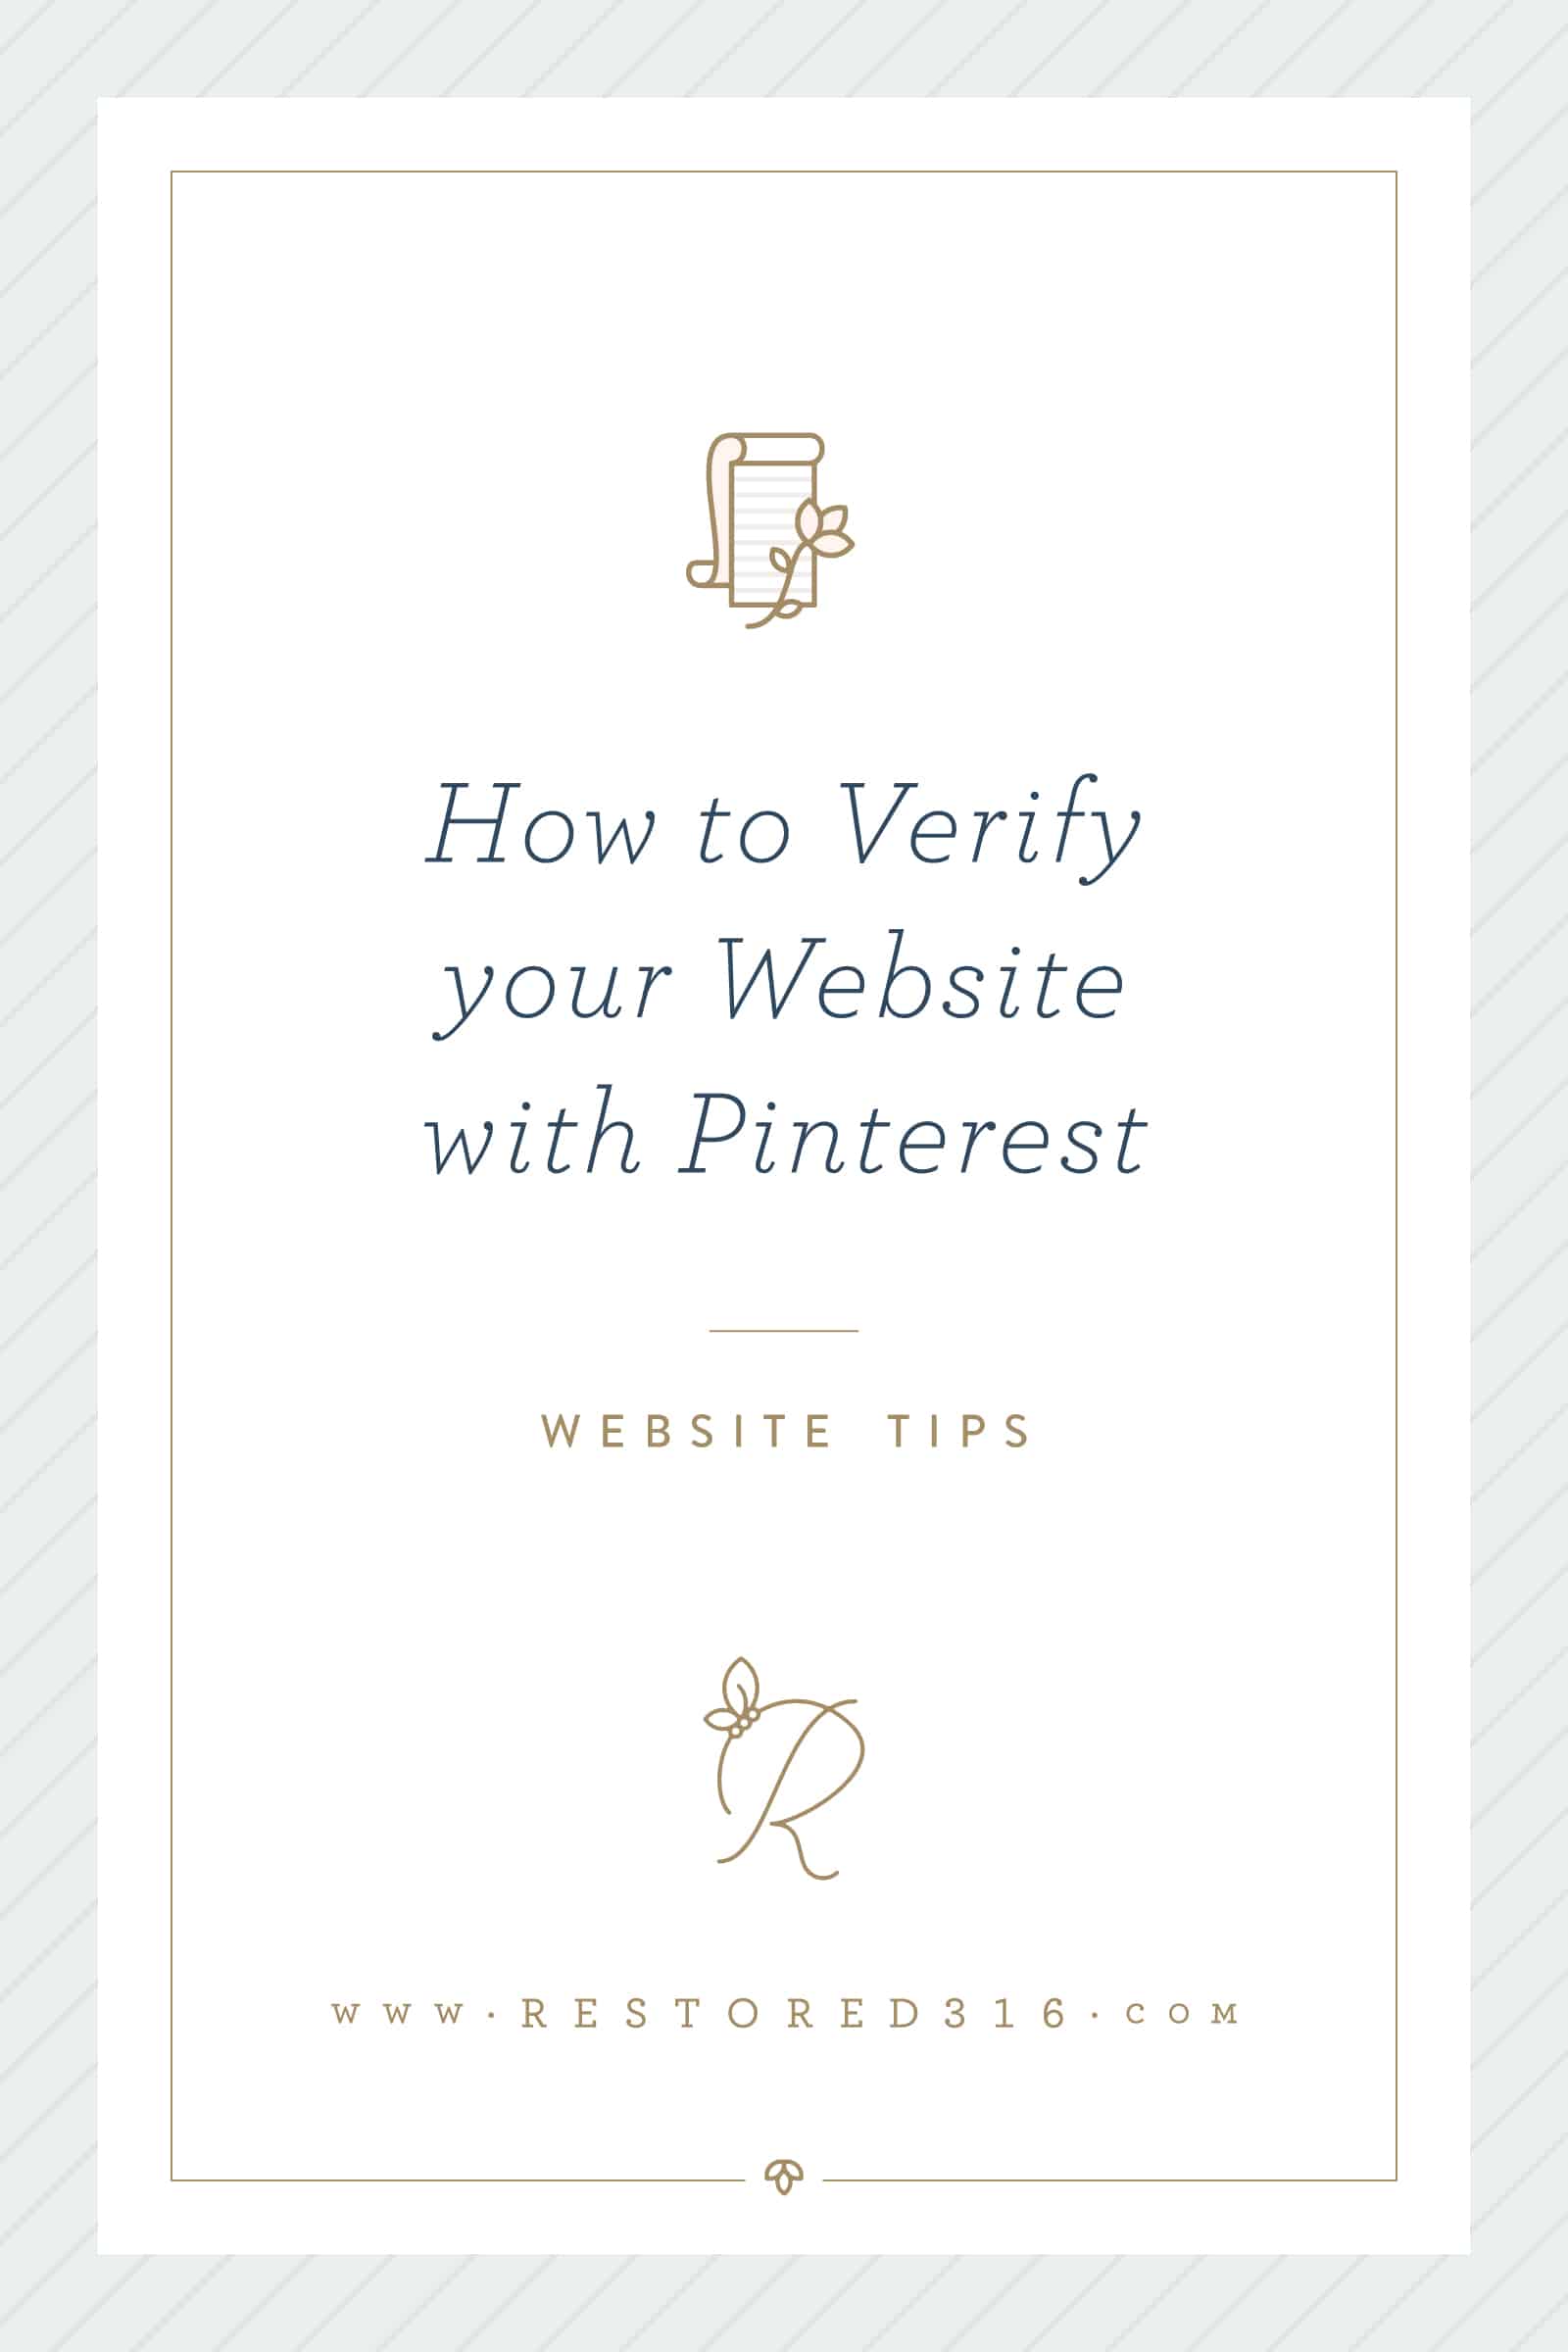 How to Verify Your Website with Pinterest